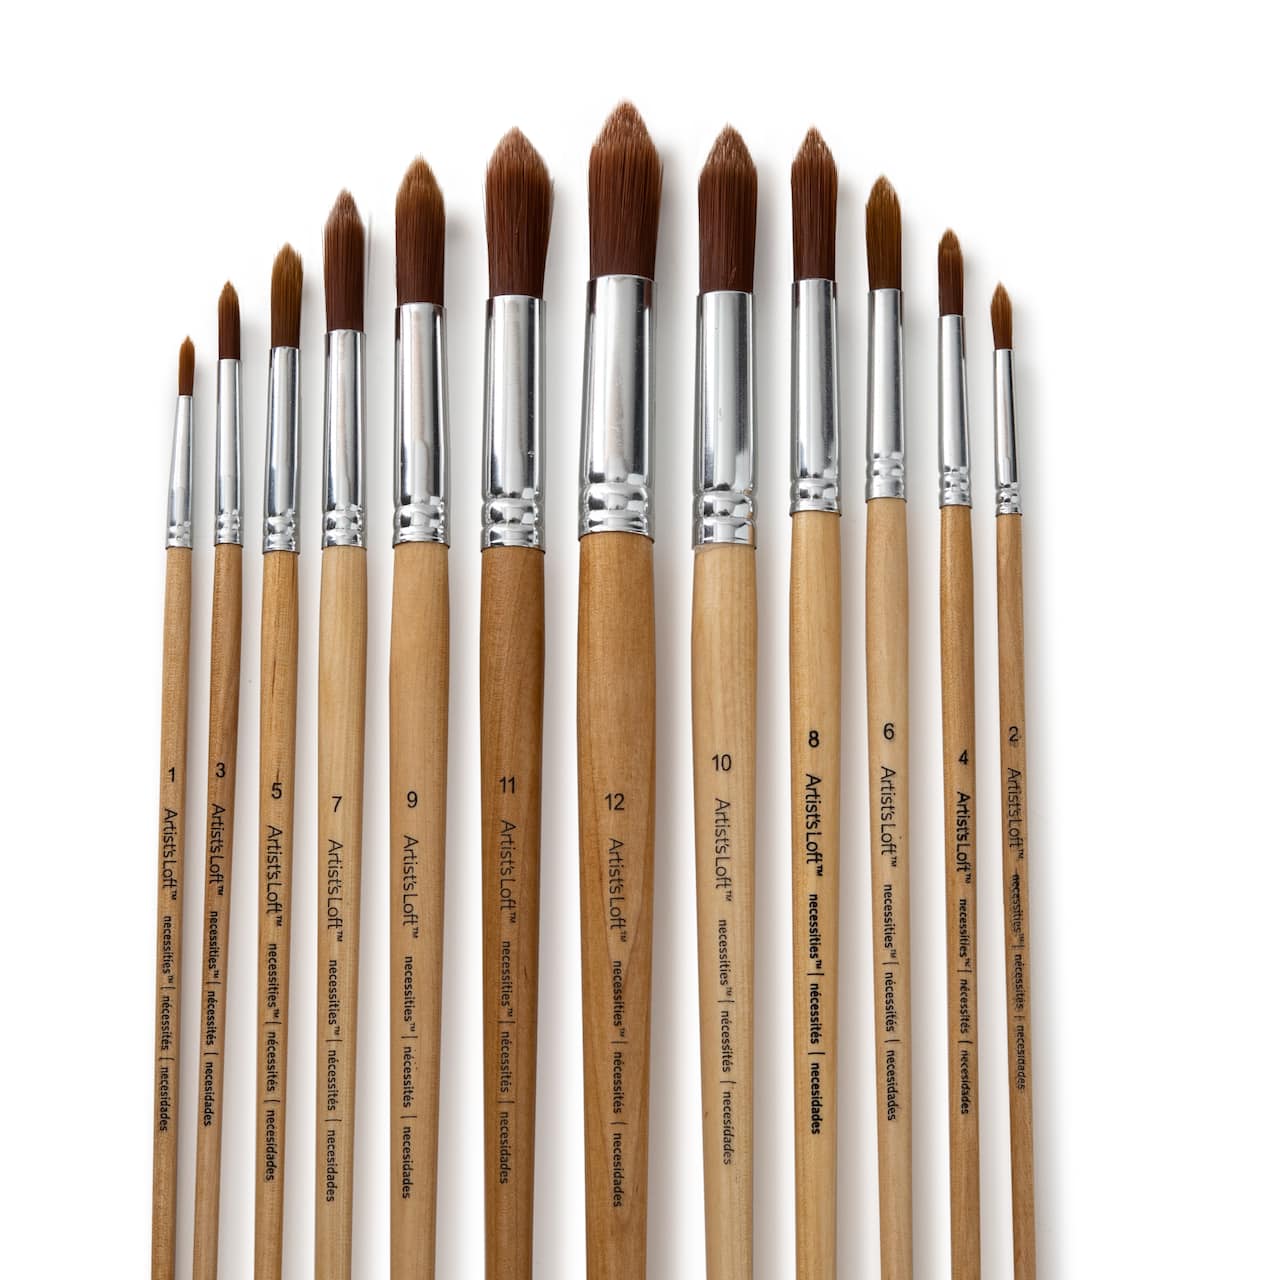 Brown Synthetic Round Brushes by Artist&#x27;s Loft&#xAE; Necessities&#x2122;